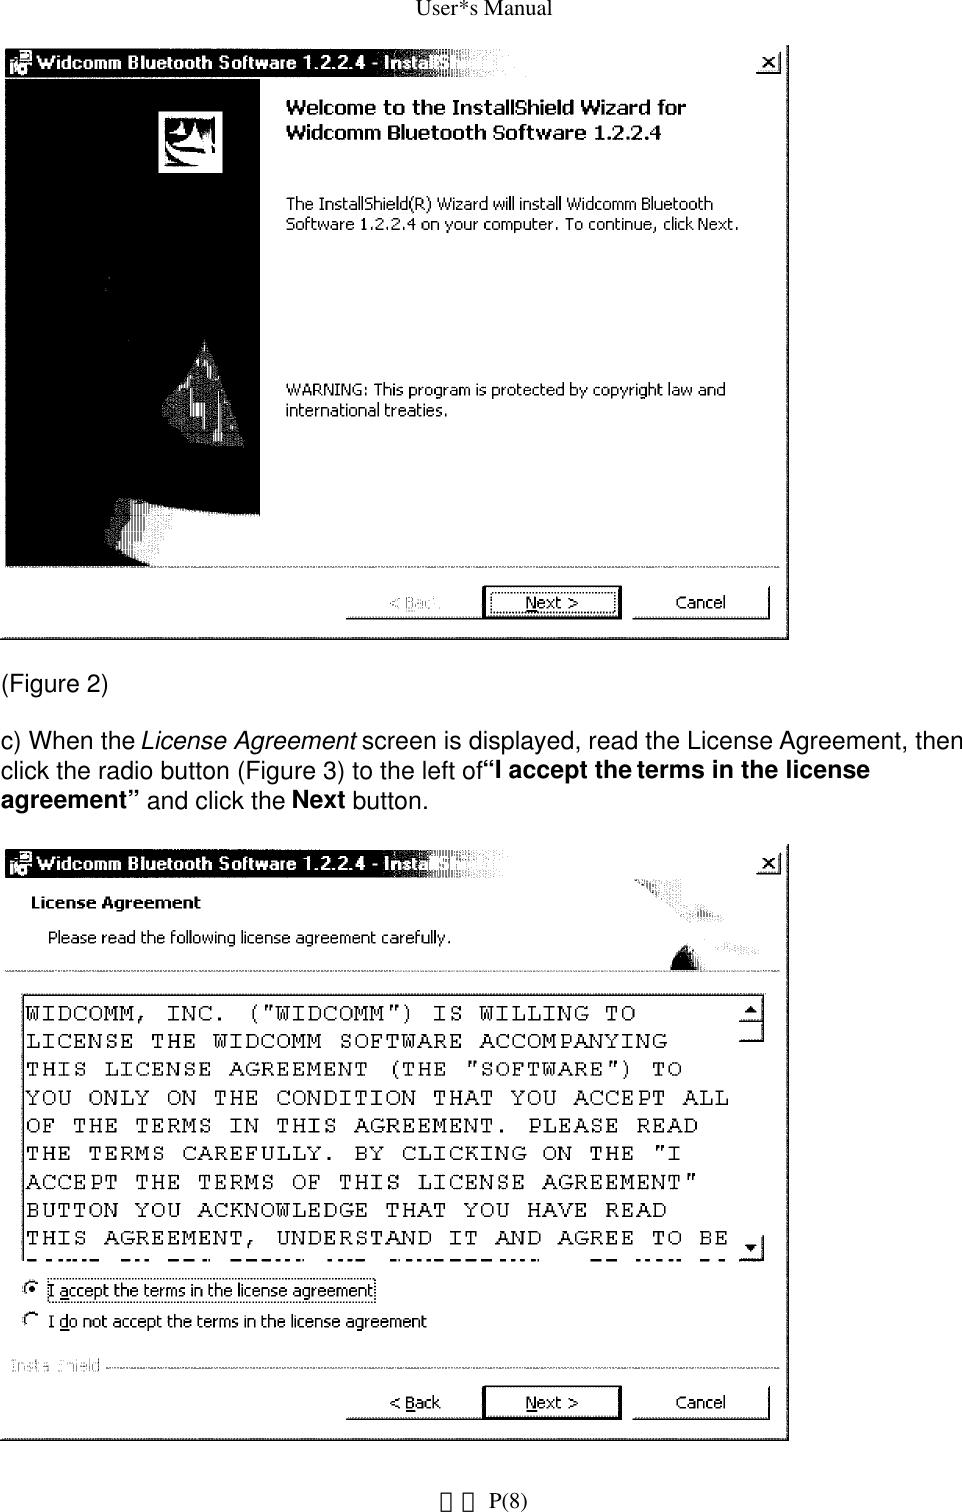 User*s Manual(Figure 2)c) When the License Agreement screen is displayed, read the License Agreement, then click the radio button (Figure 3) to the left of “I accept the terms in the license agreement” and click the Next button. P(8)網頁